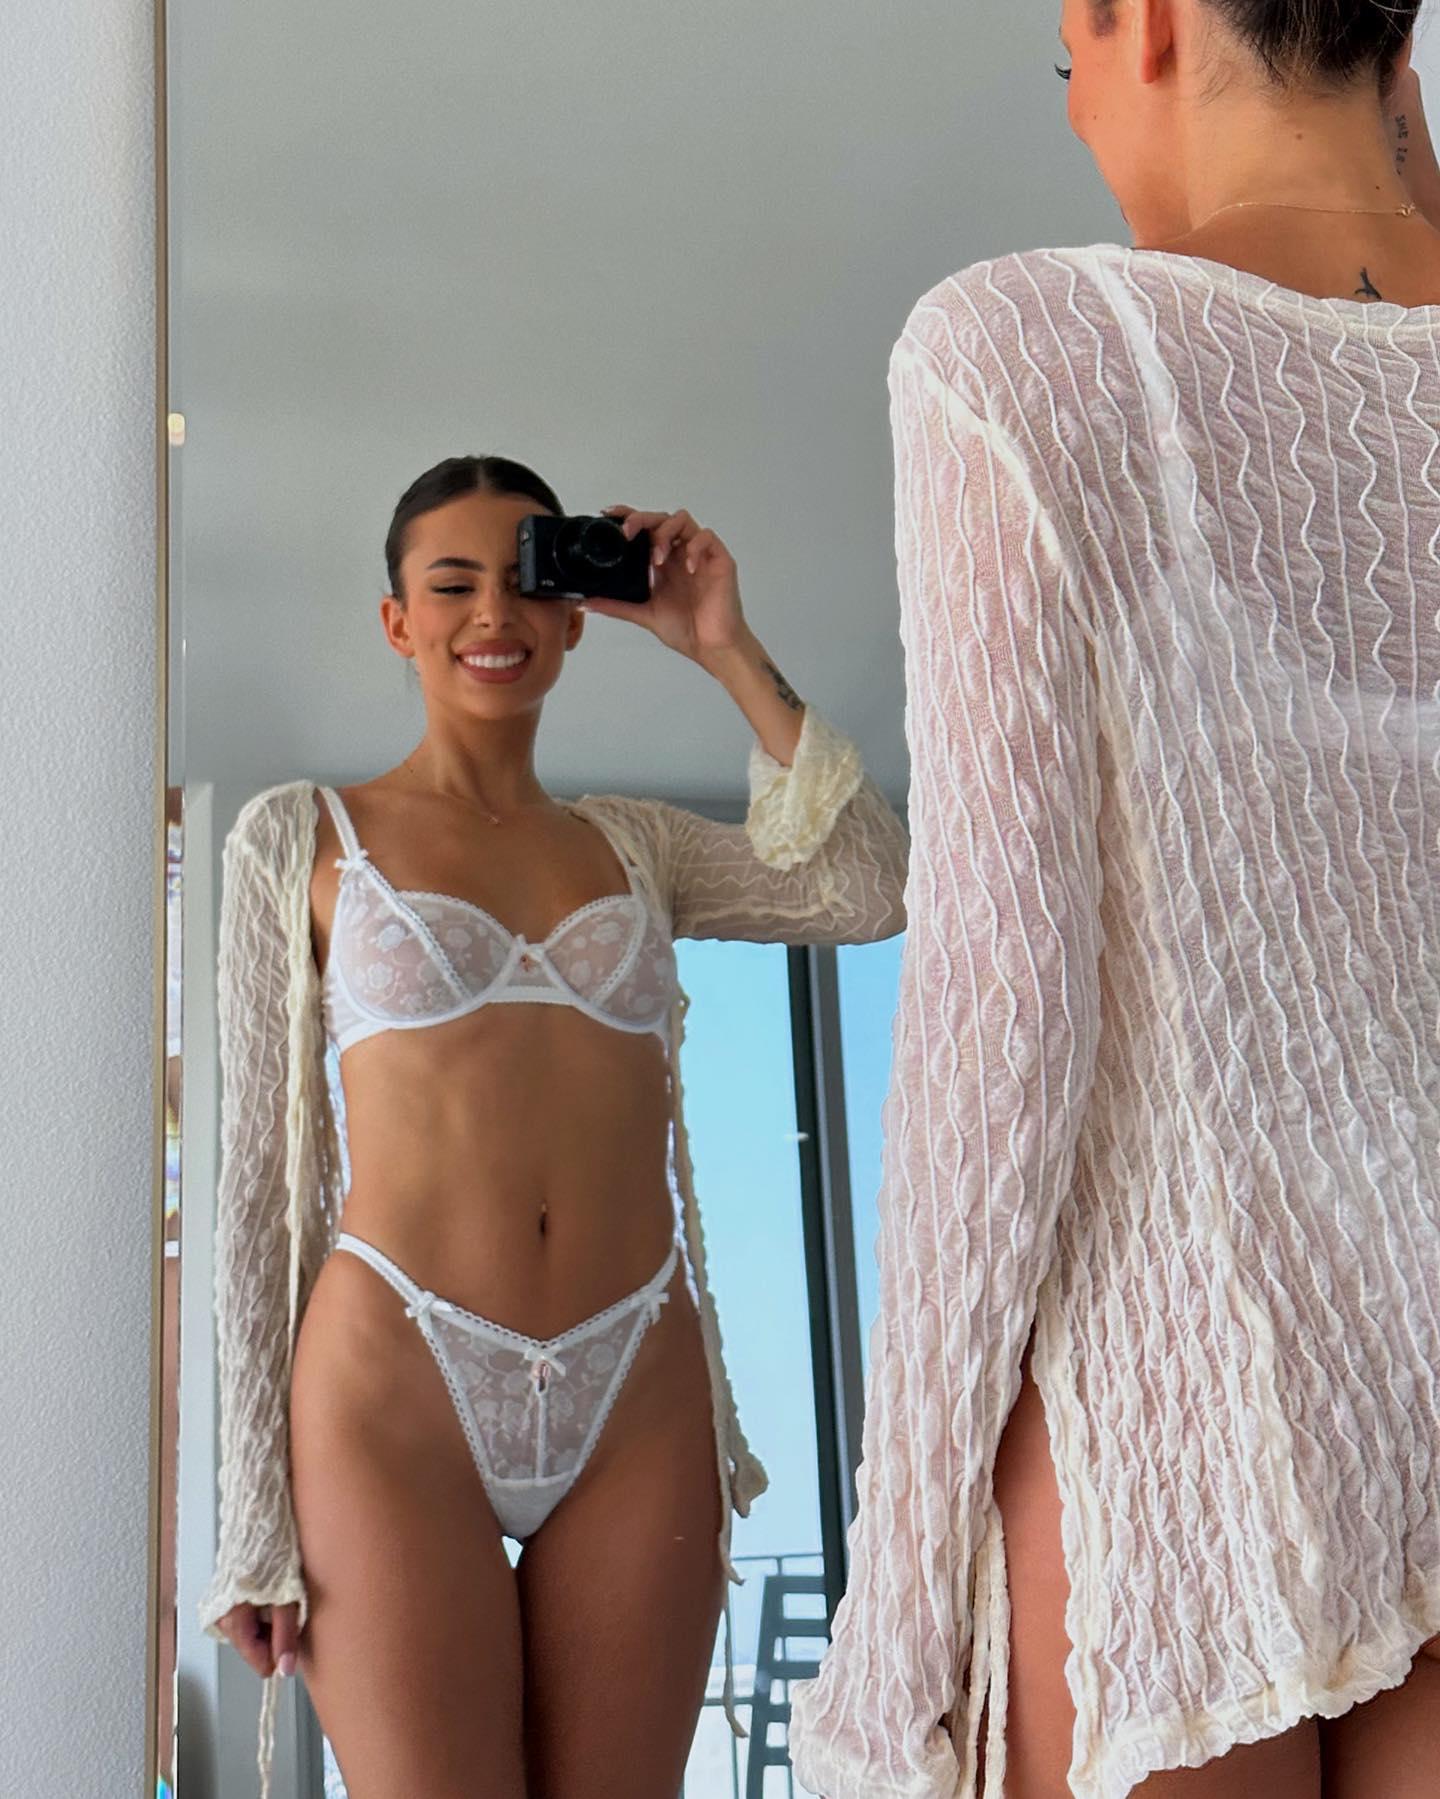 Kayla Richart Is ‘Too Hot To Handle’ In Sheer White Lingerie